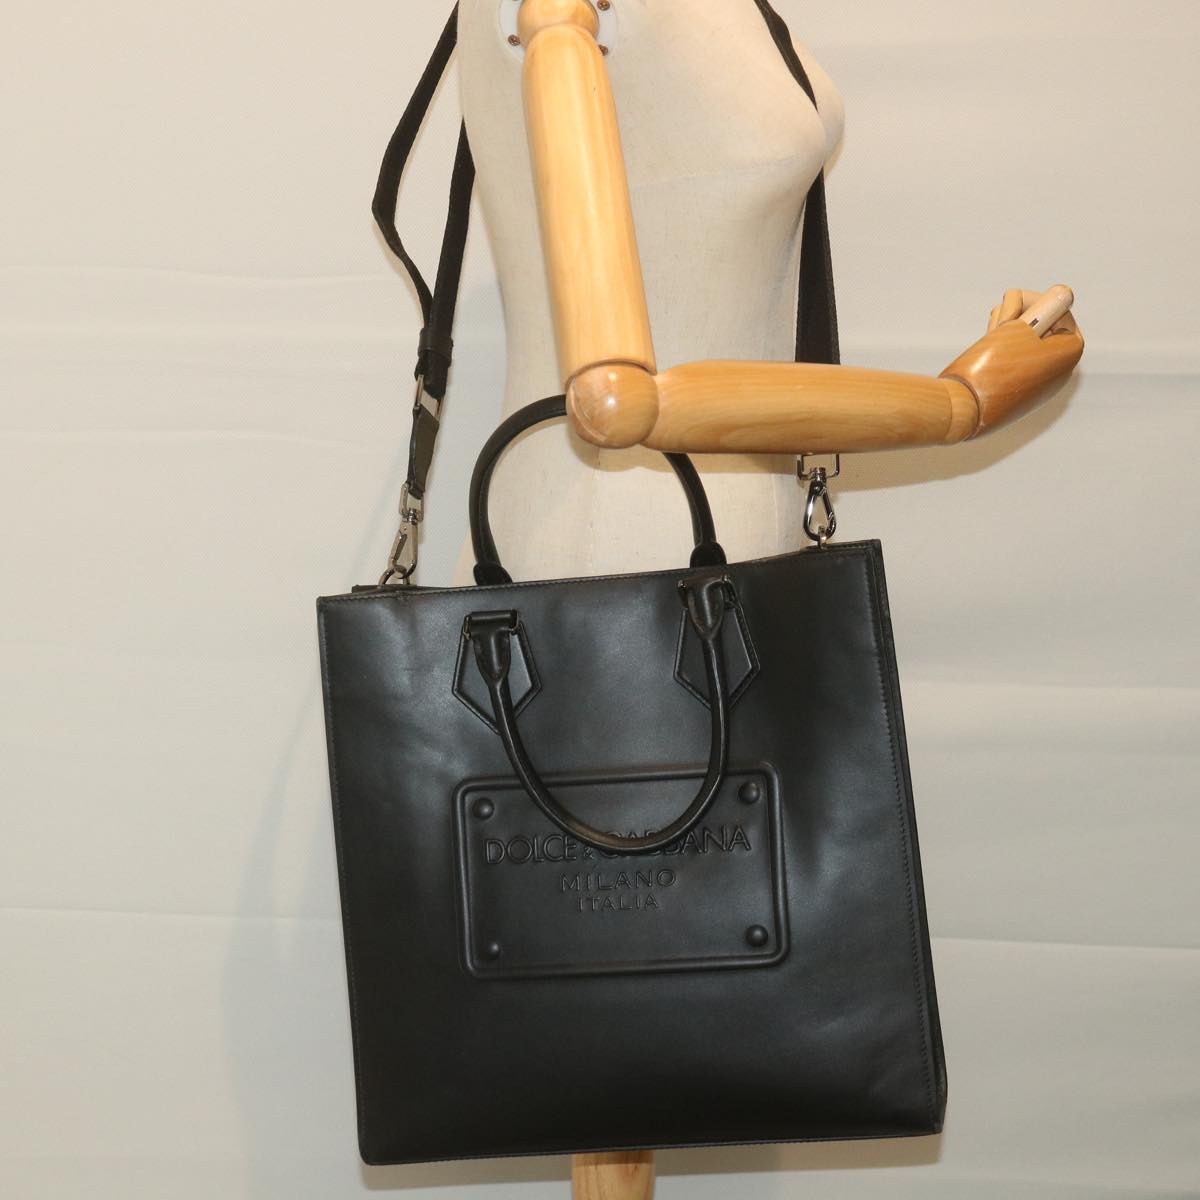 DOLCE&GABBANA Tote Bag Calf leather 2way Black Auth bs10232